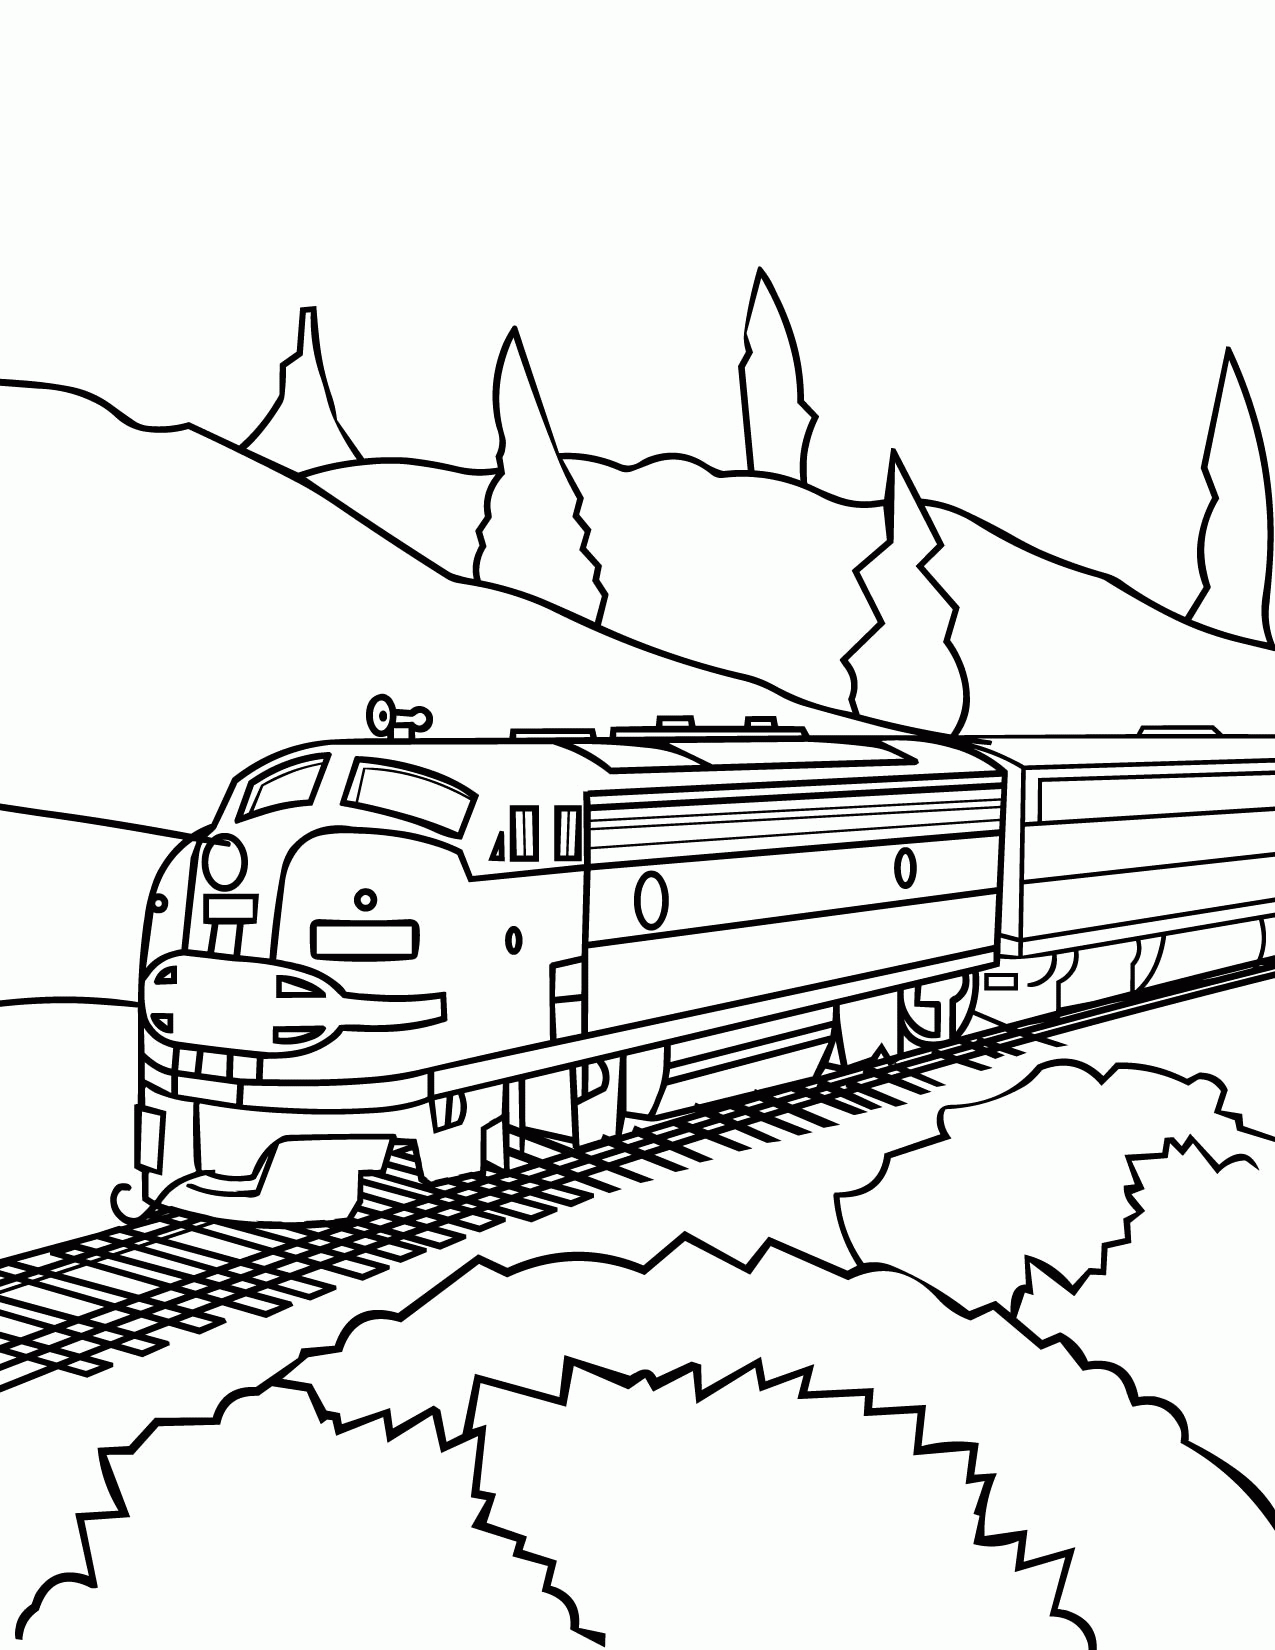 Coloring pages | Coloring2pages.com